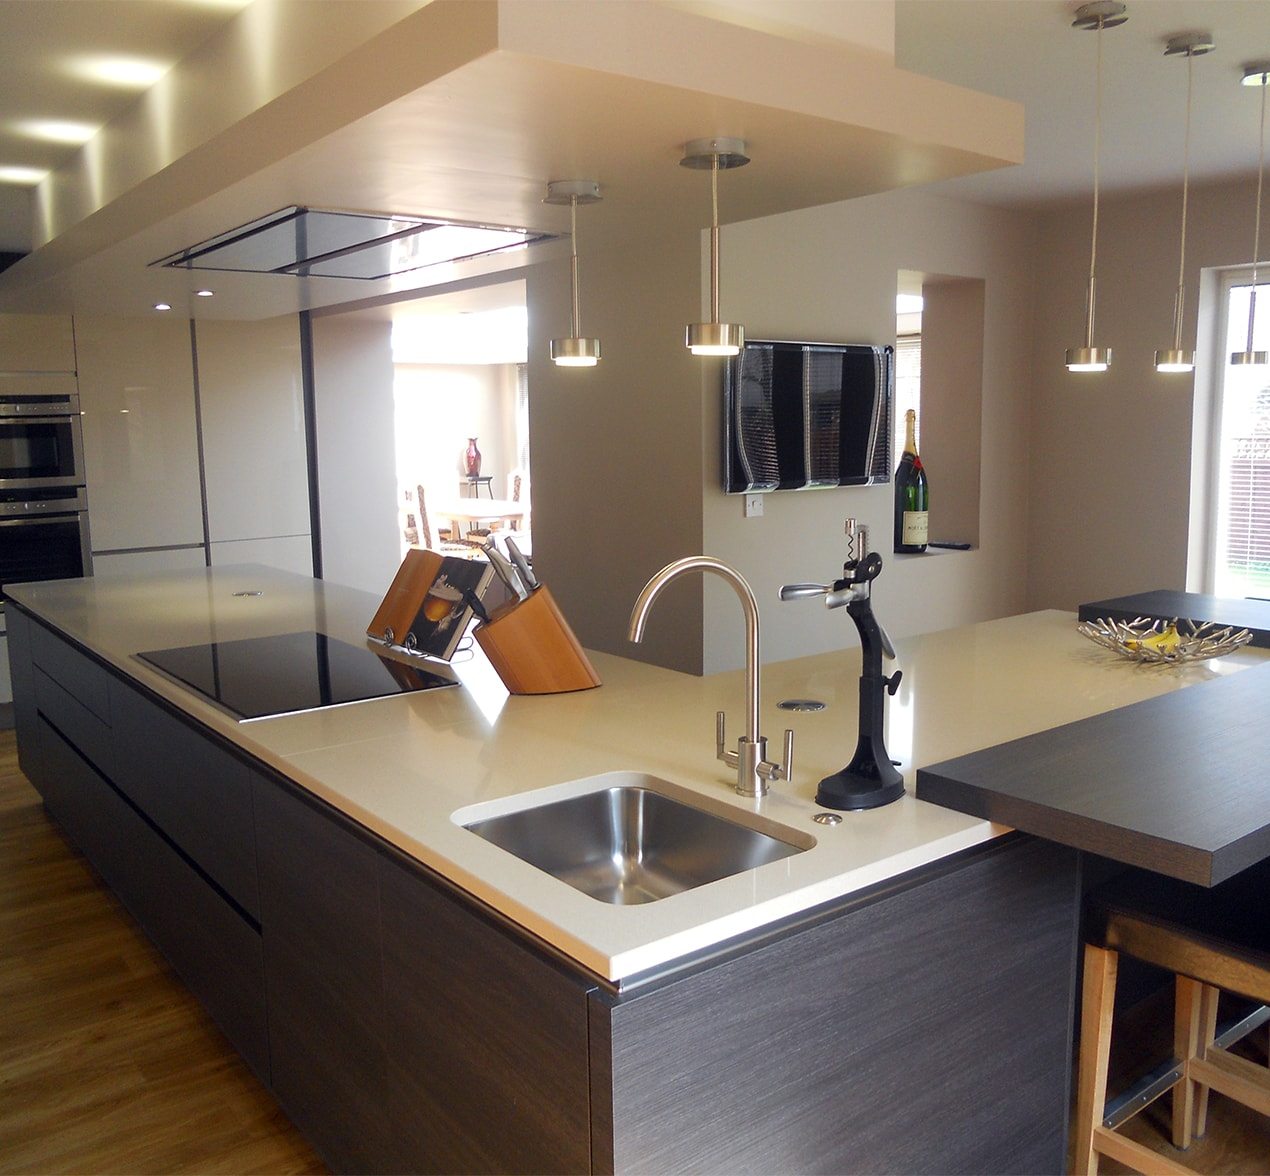 An innovative, unique kitchen design in Whalley